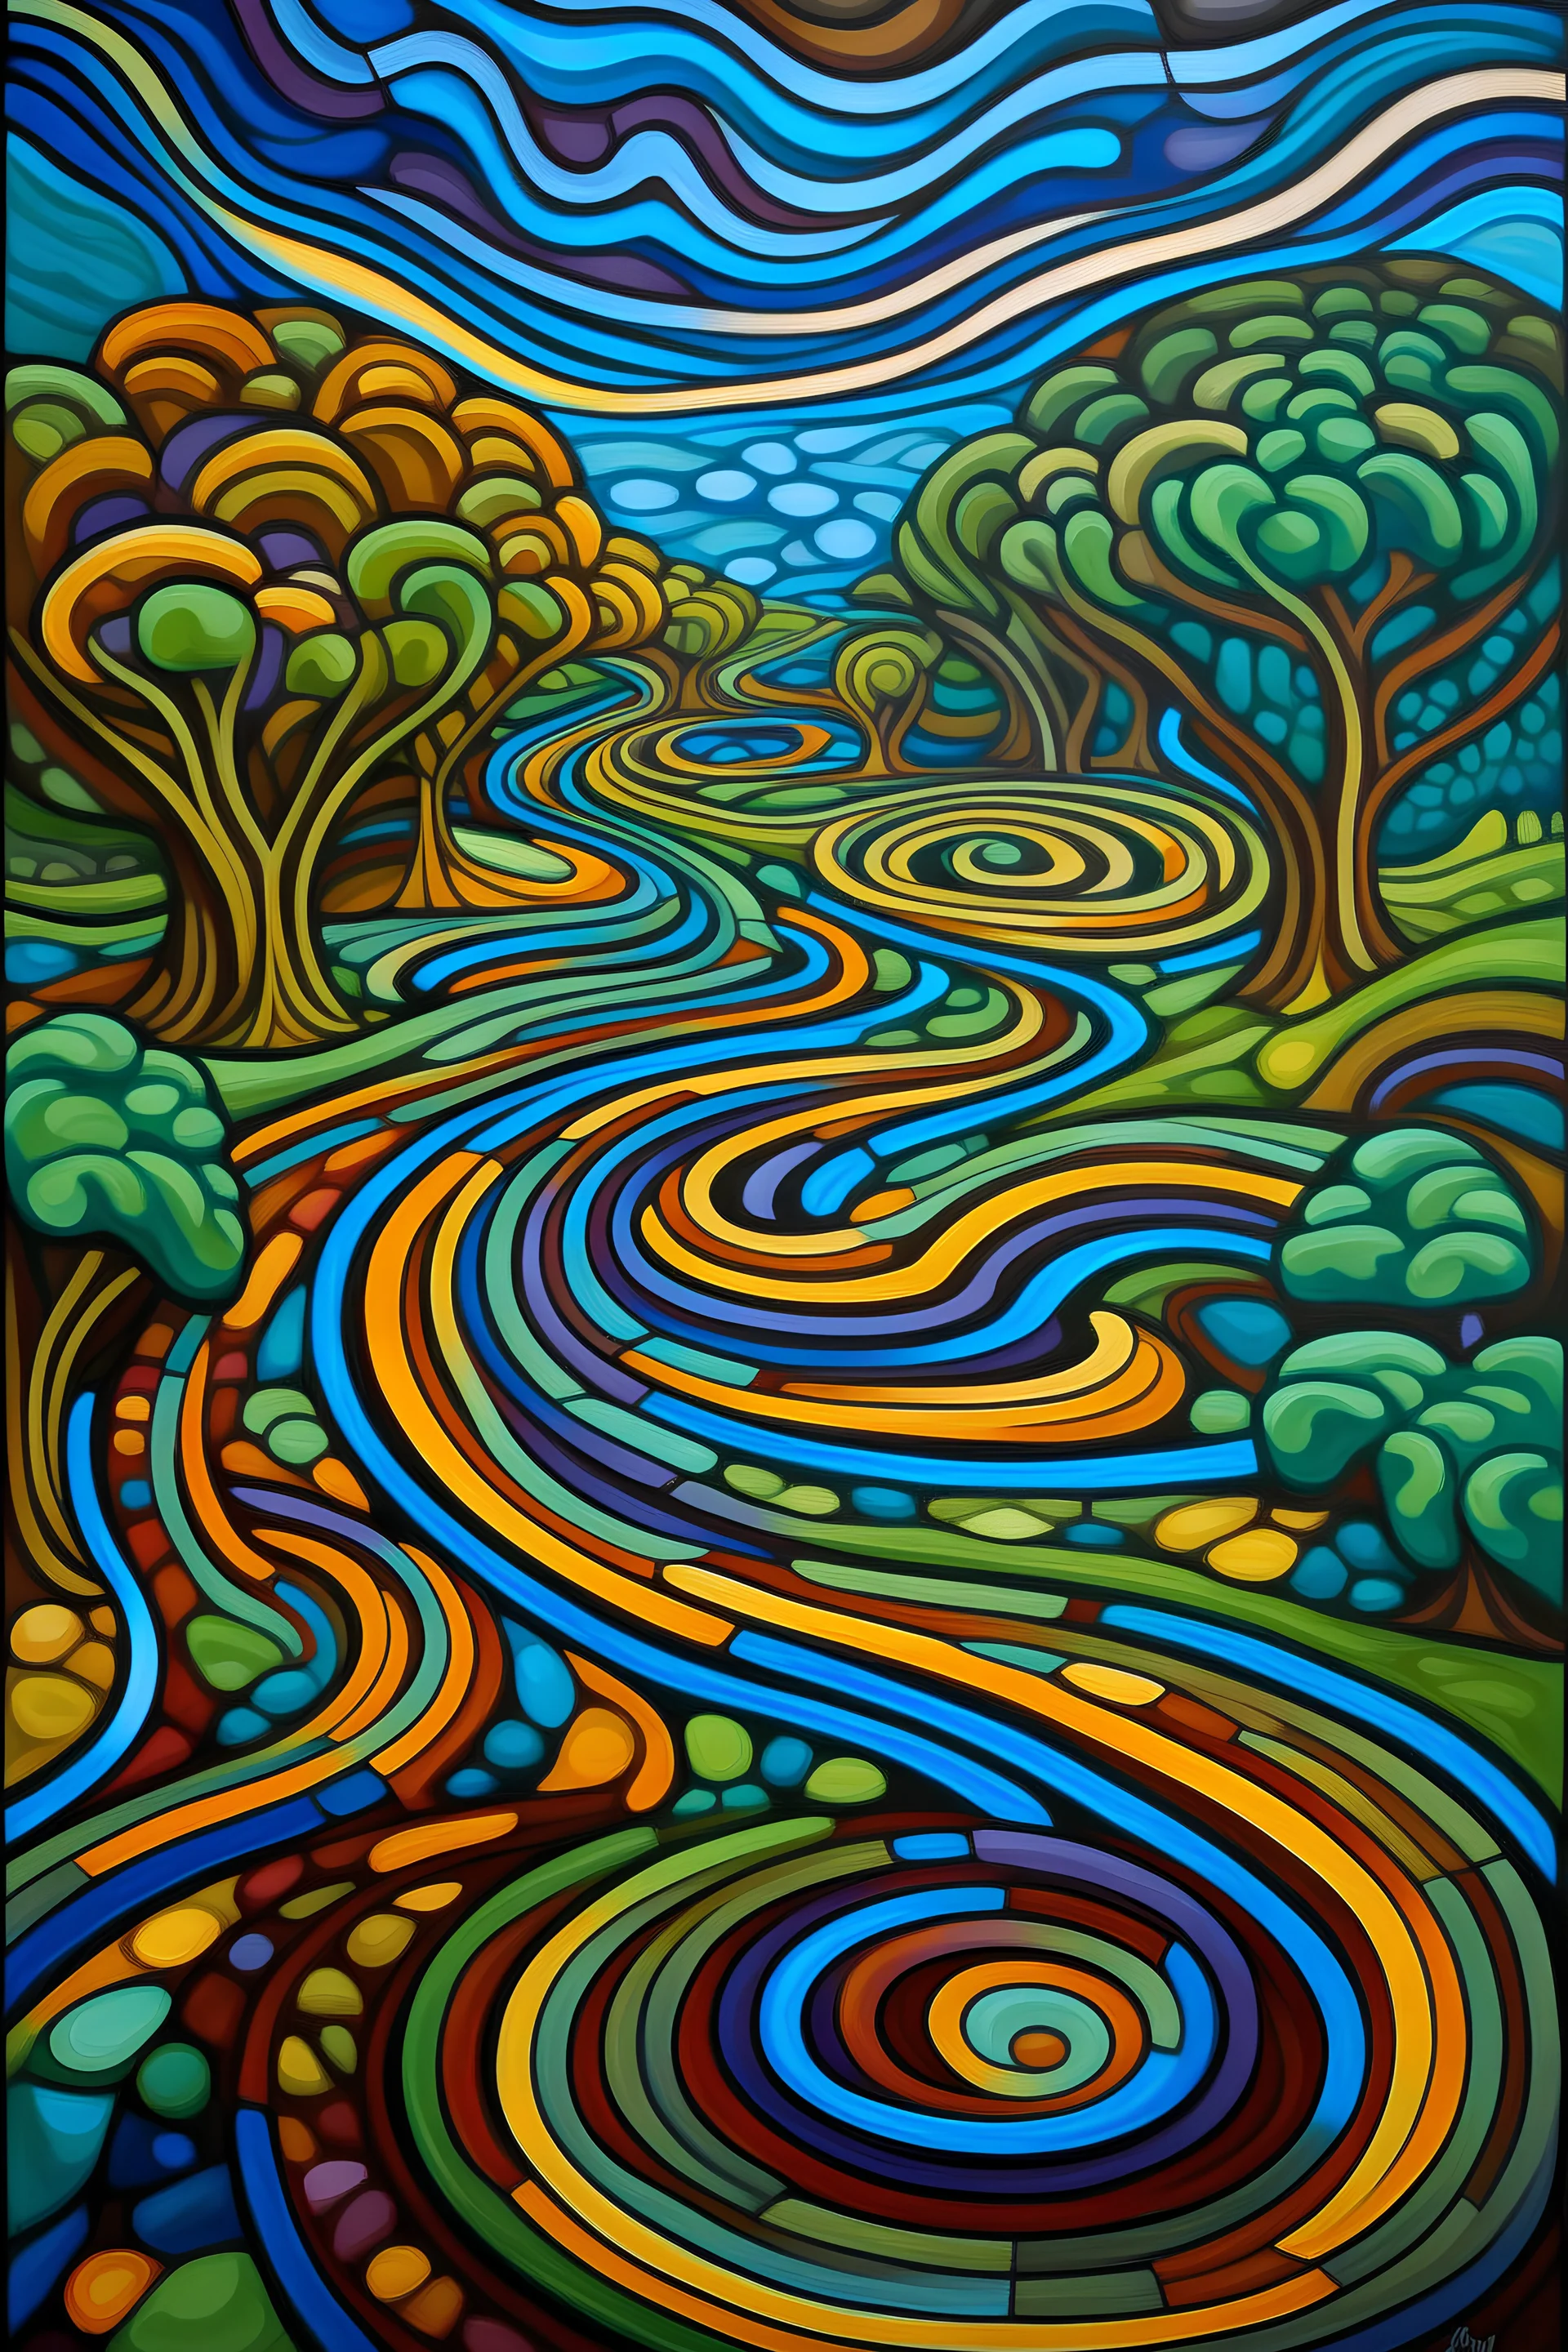 the maze pathways curving and branching out like a river flowing through a fantastical landscape. Each turn reveals a different artistic expression, evoking a range of emotions: fear, joy, sadness, wonder. elements that symbolize the ever-changing nature of life and the importance of embracing diverse perspectives. Think illogical geometries, contrasting colors, and unexpected surprises around every corner.